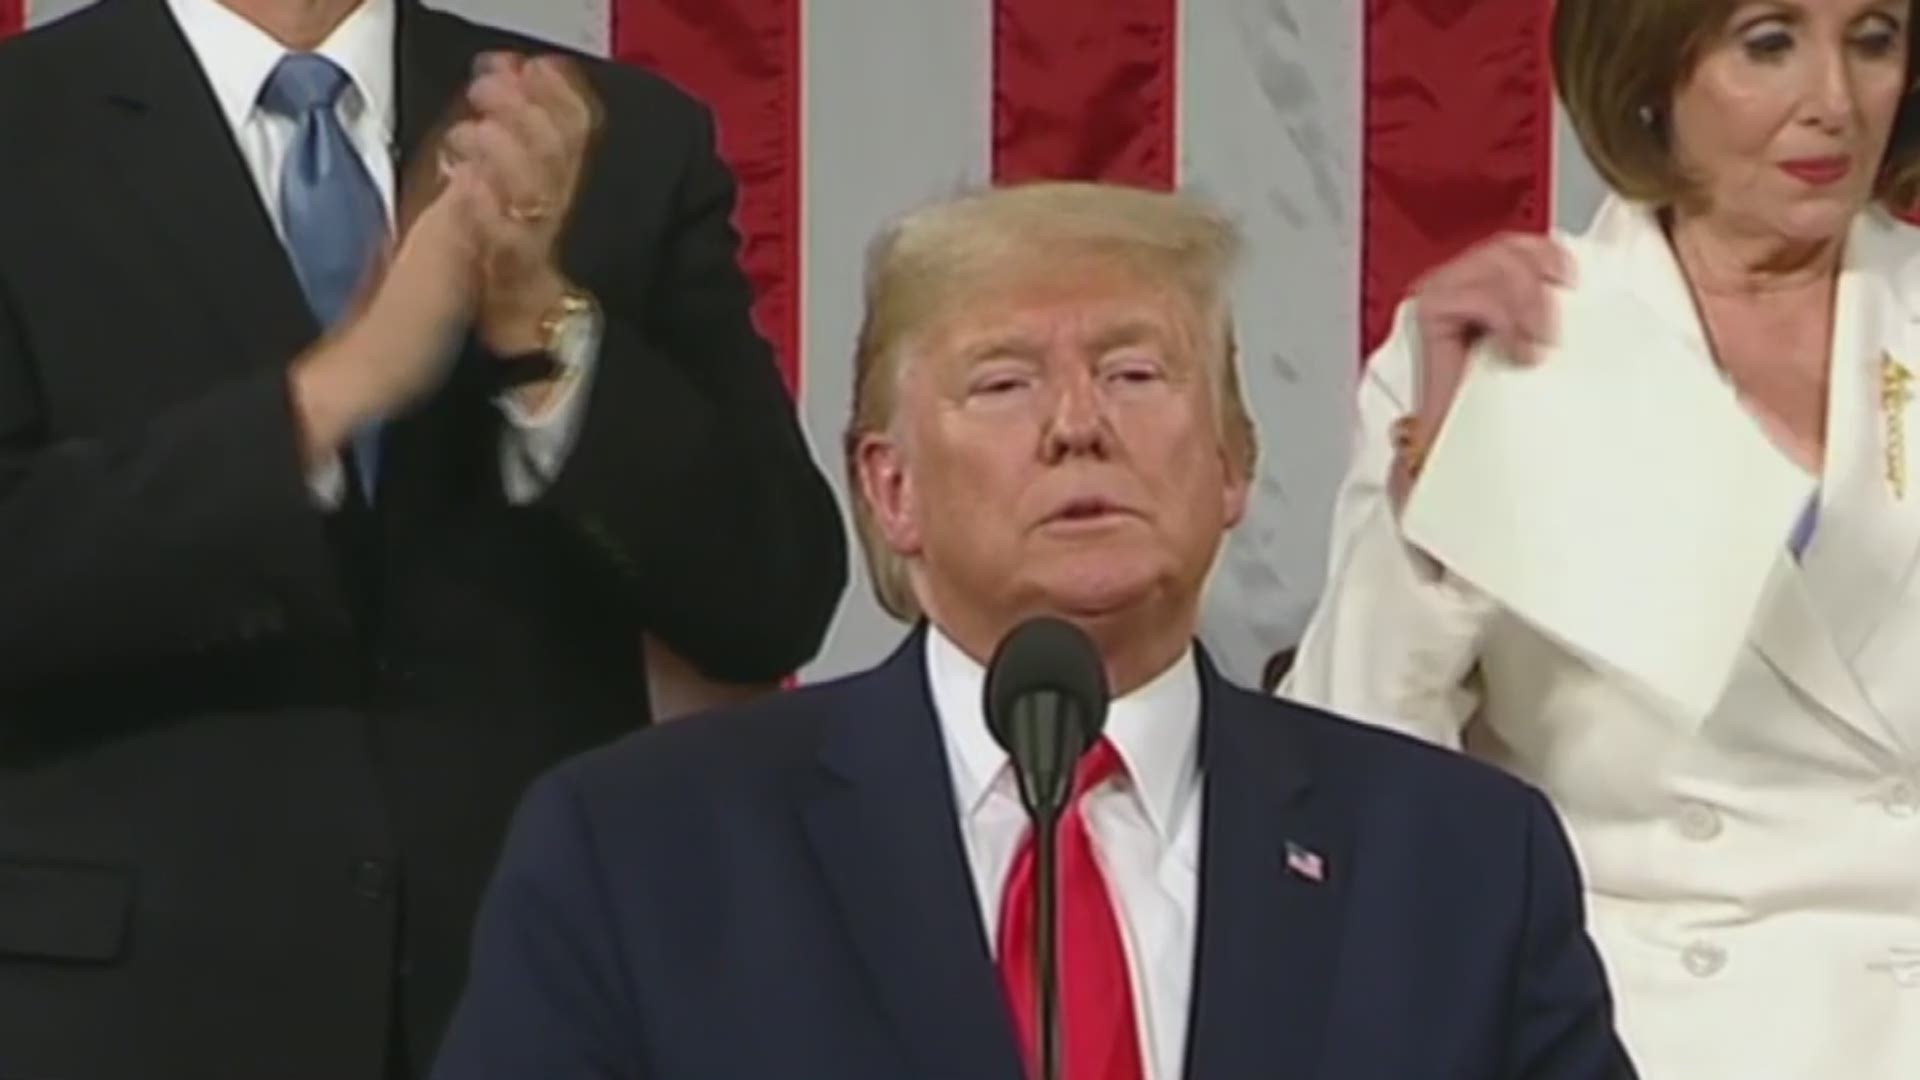 A 12 News voter panel watched Trump's third State of the Union speech, taking note not just of the words, but the optics.